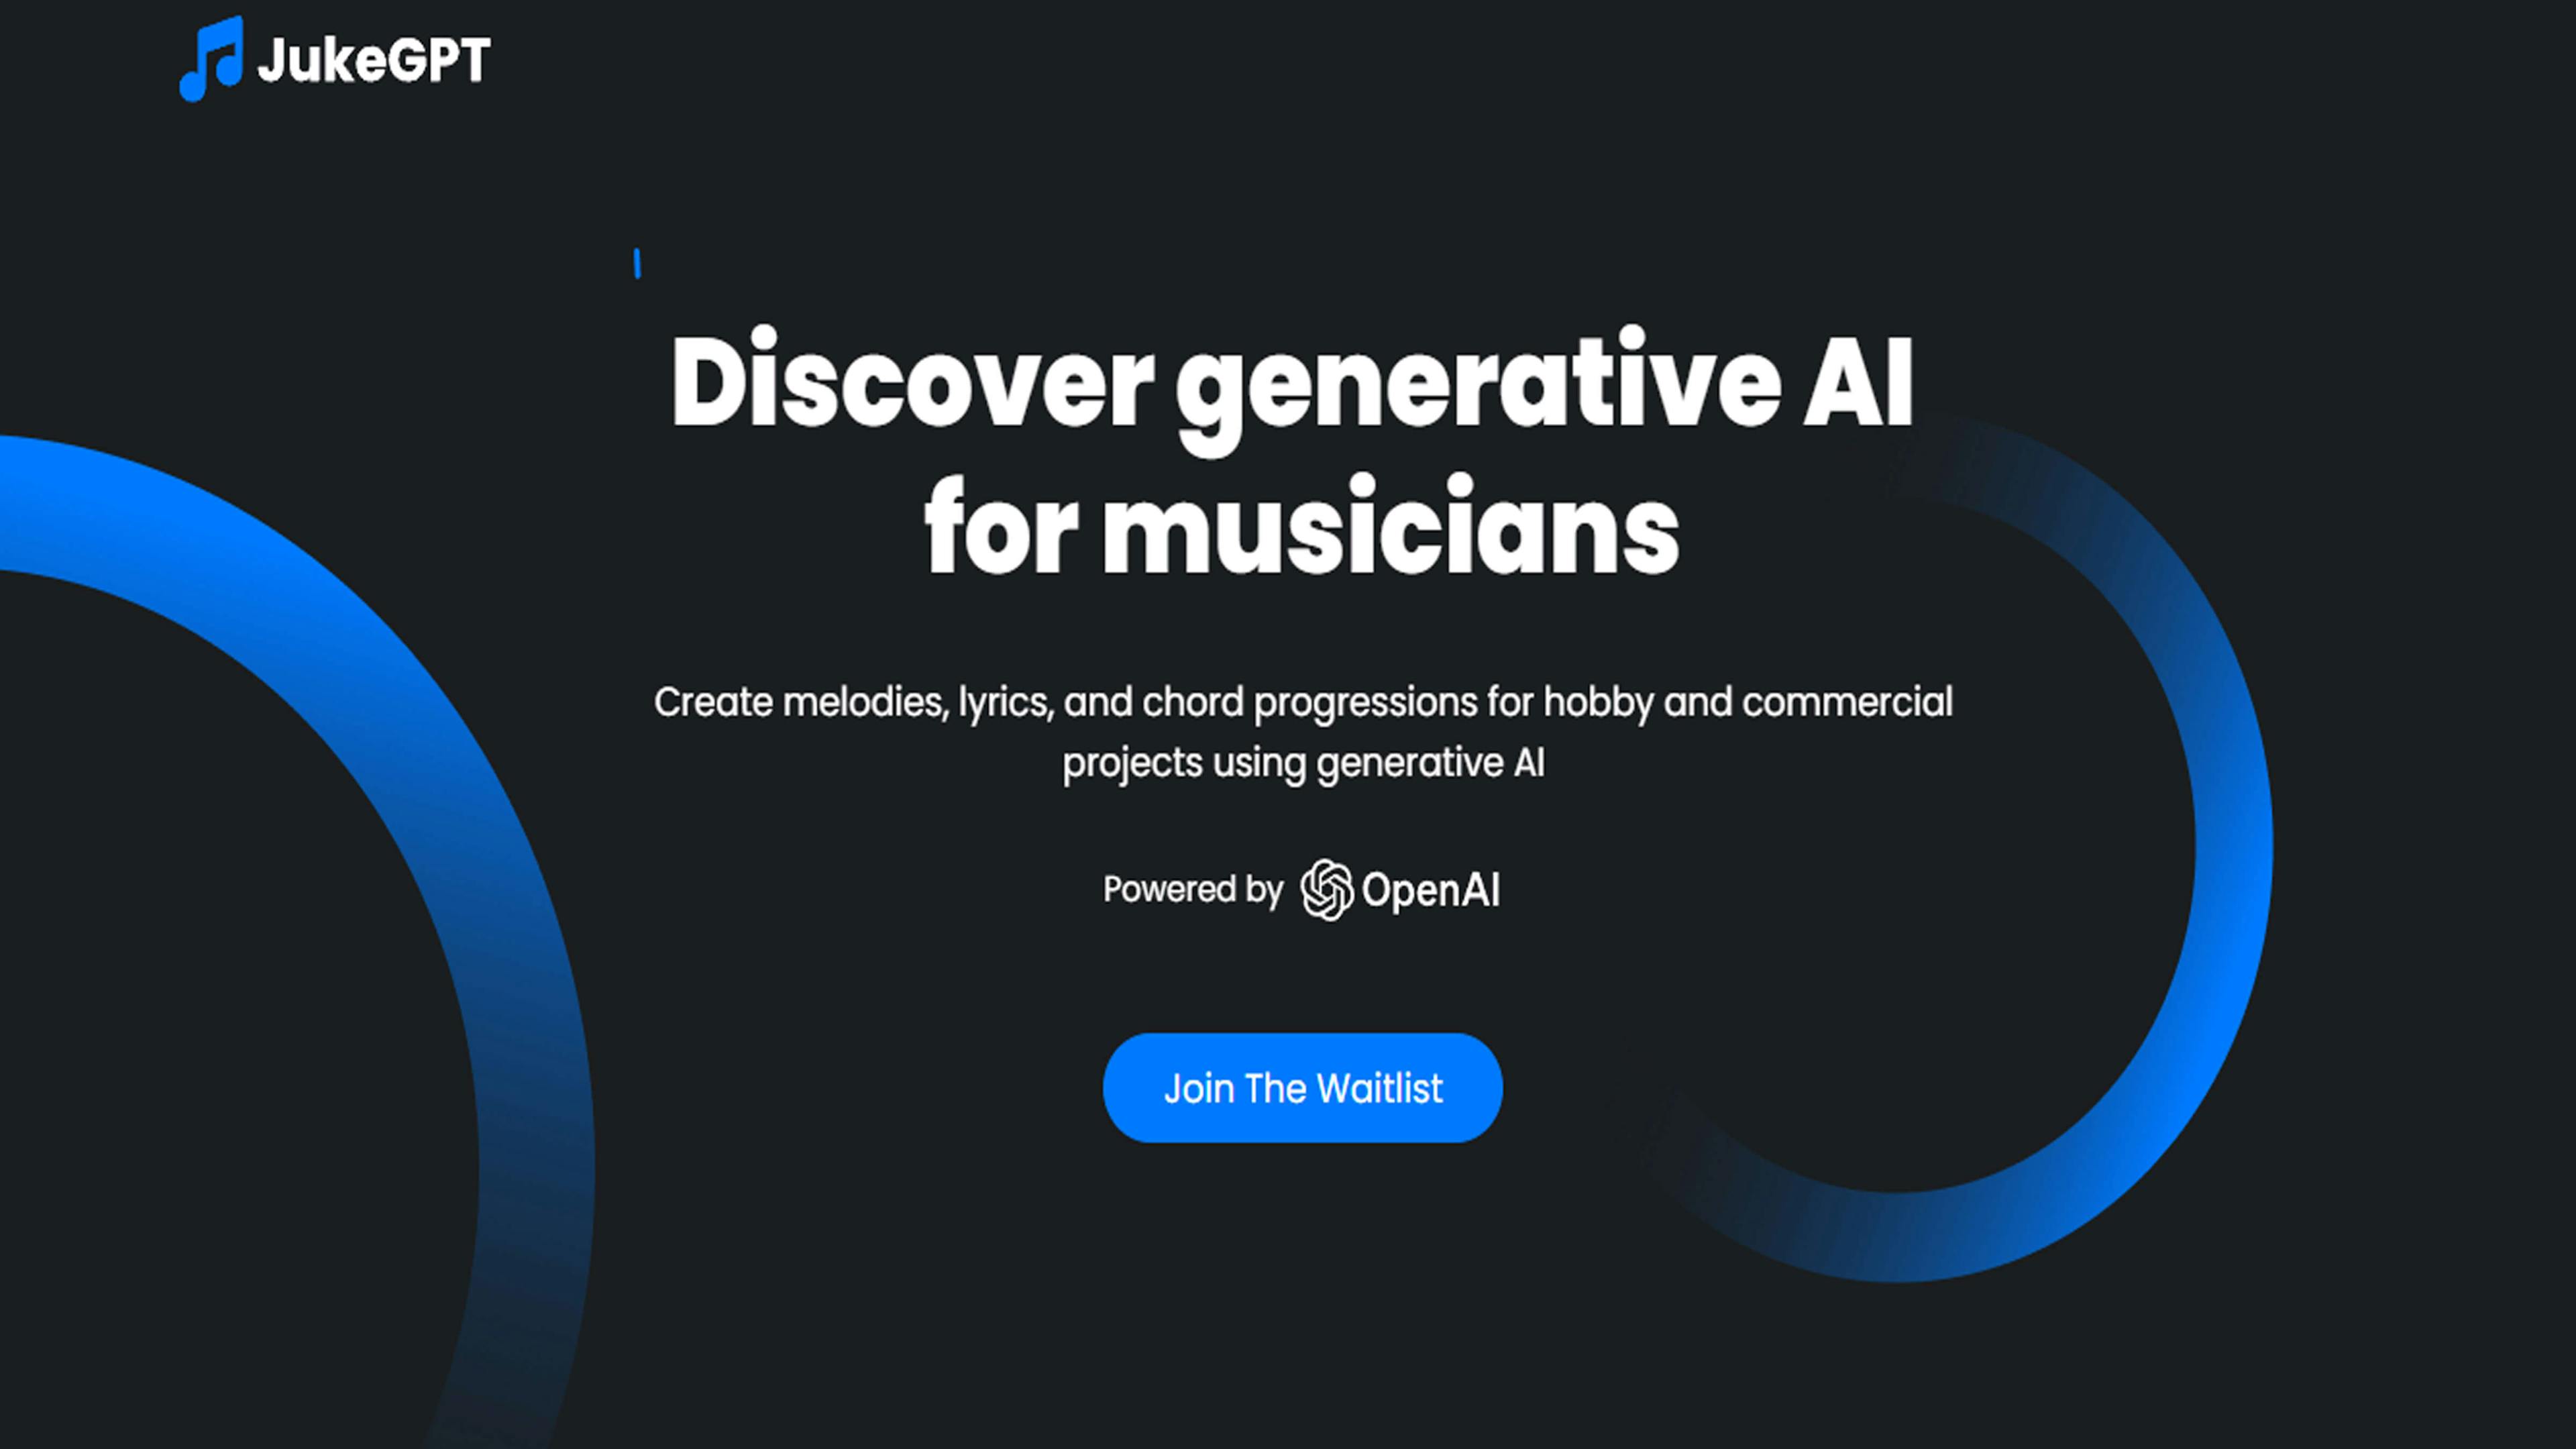 Create personalized playlists effortlessly with JukeGPT.